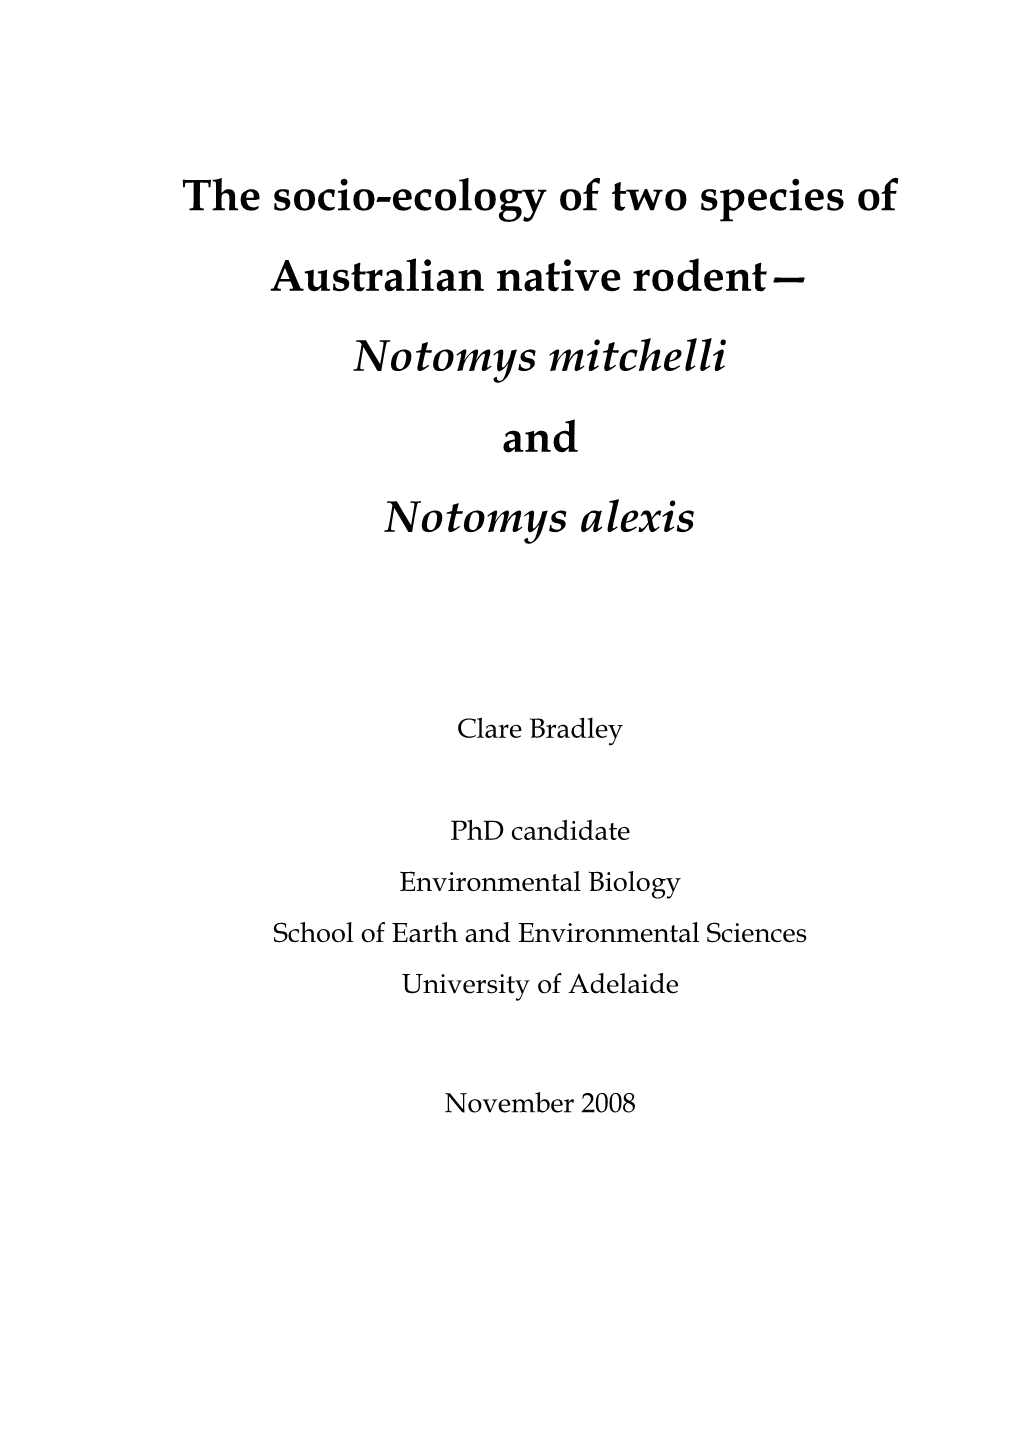 The Socio-Ecology of Two Species of Australian Native Rodent—Notomys Mitchelli